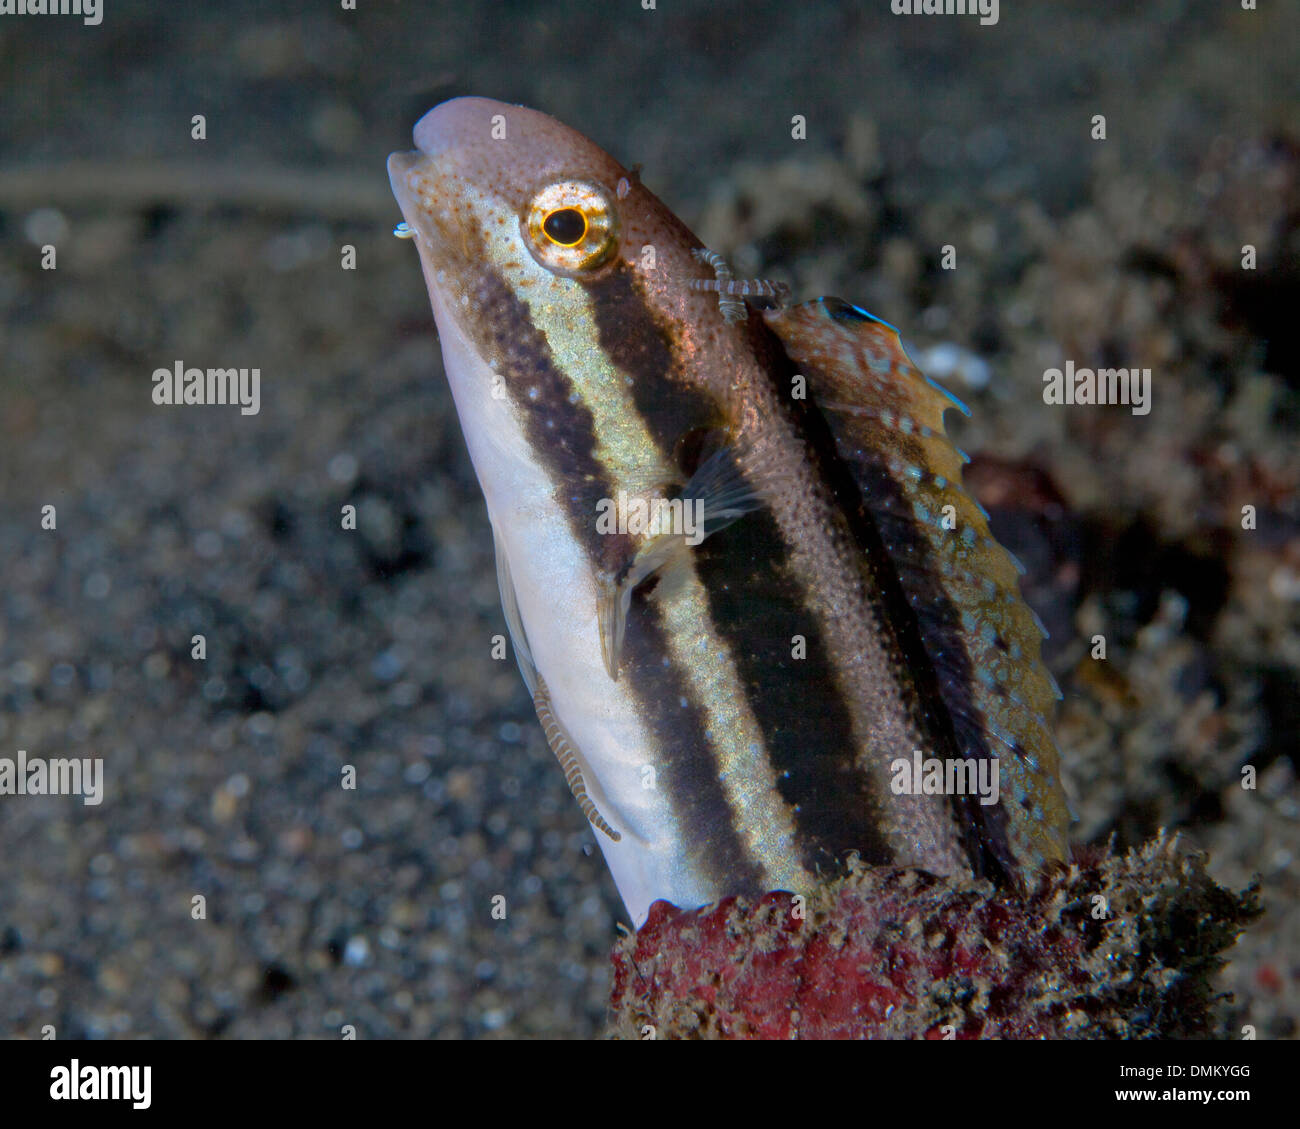 Shorthead fang blenny (Petroscirtes breviceps) with apparent parasites attached, peering from its tube sponge. Stock Photo